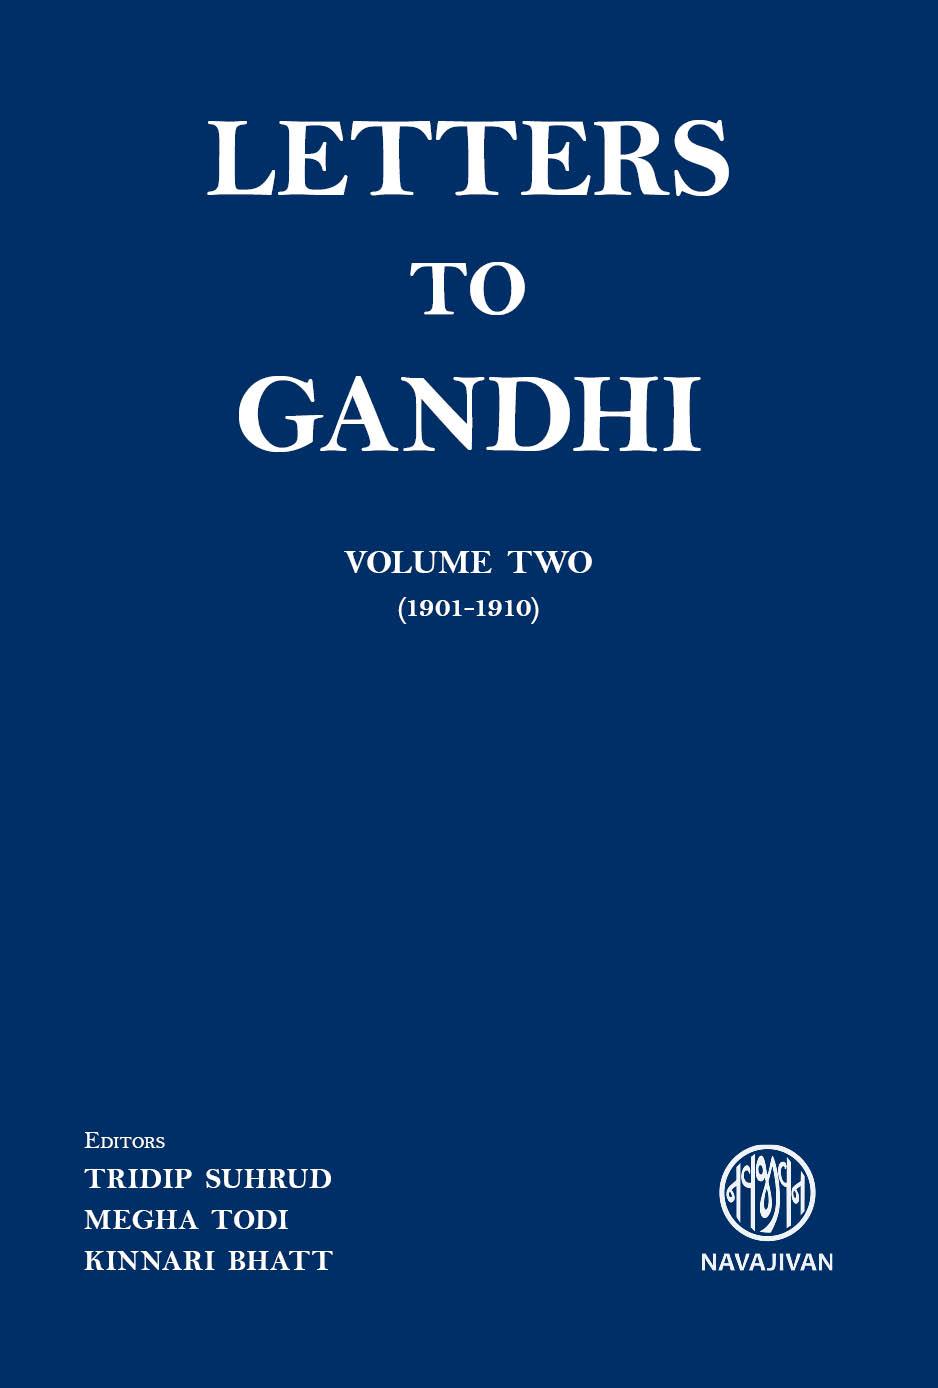 Letters to Gandhi Volume Two (1901-1910)